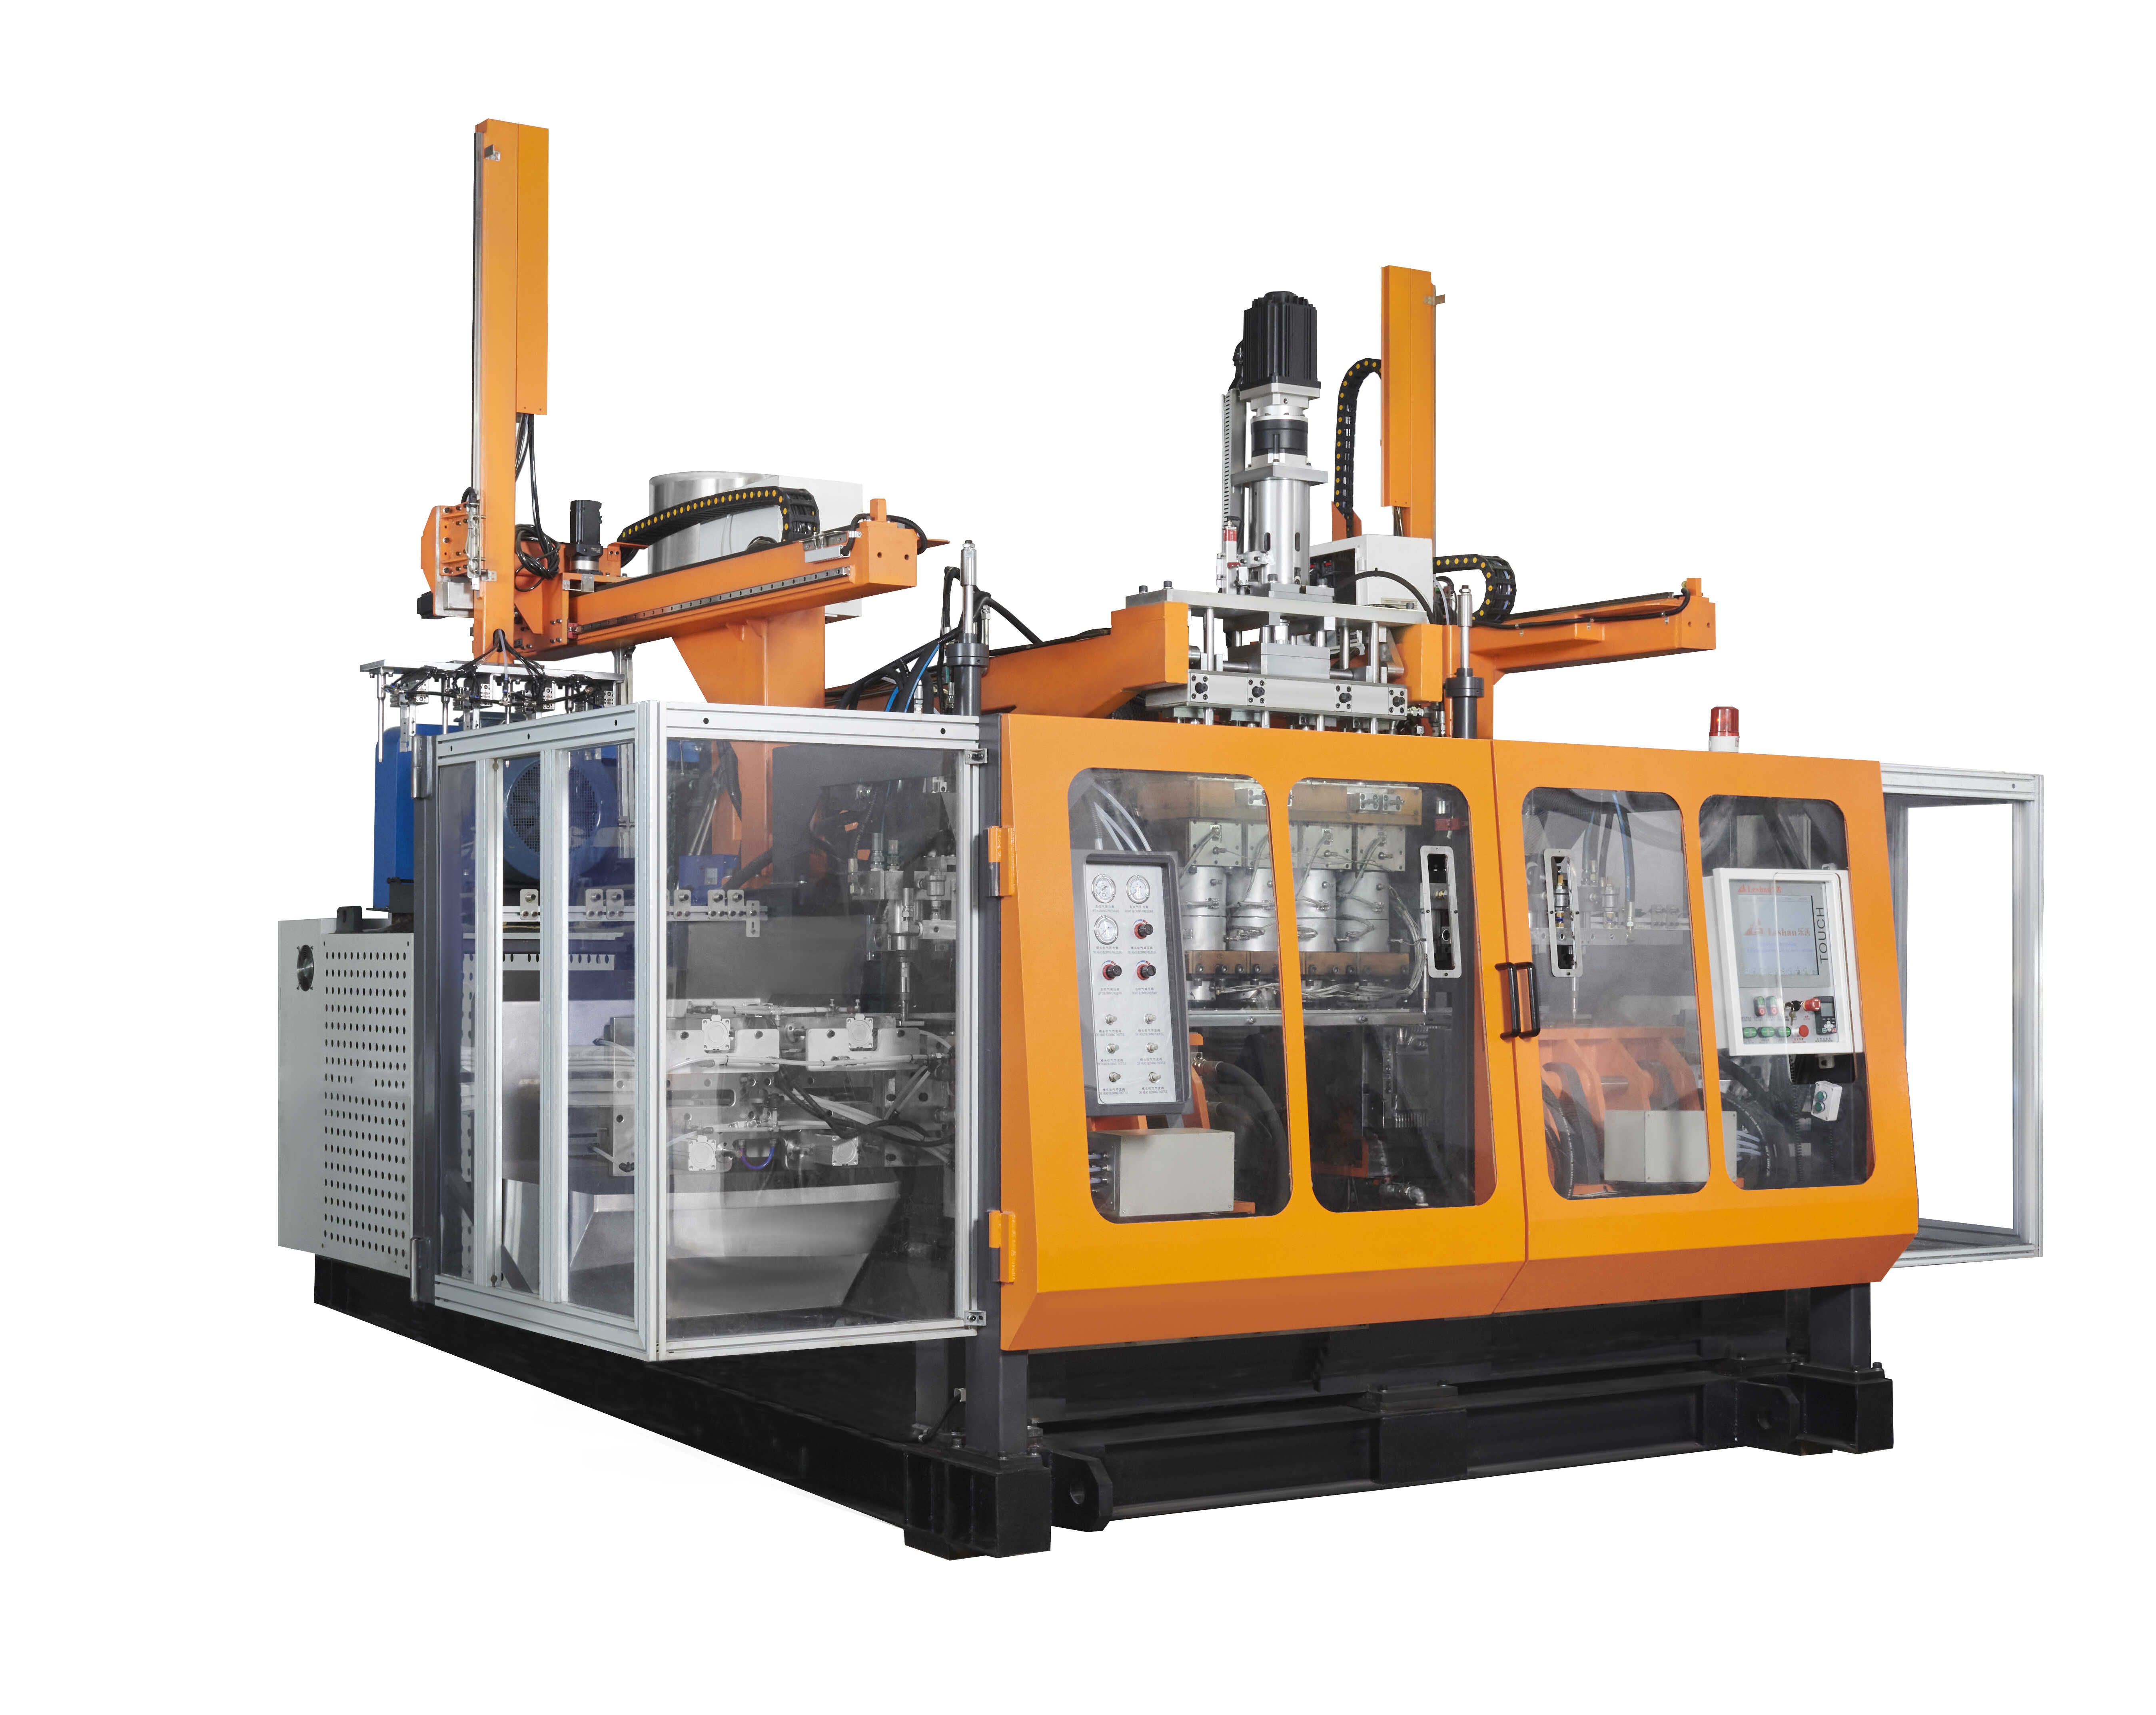 How to choose a suitable extrusion blow molding hdpe supplier?